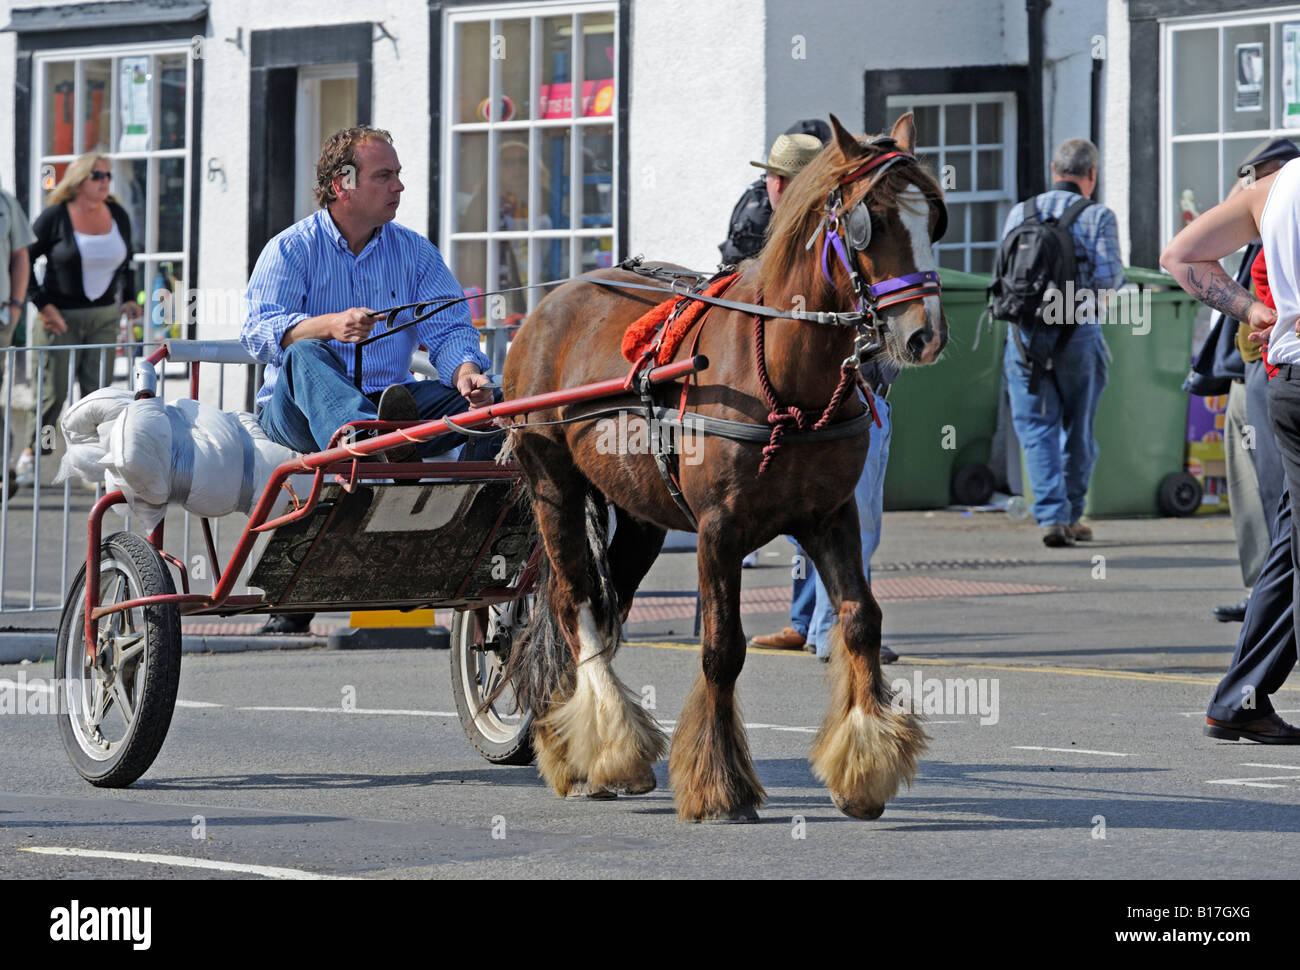 Gypsy traveller with trotting horse and trap. Appleby Horse Fair. Appleby-in-Westmorland, Cumbria, England, United Kingdom. Stock Photo